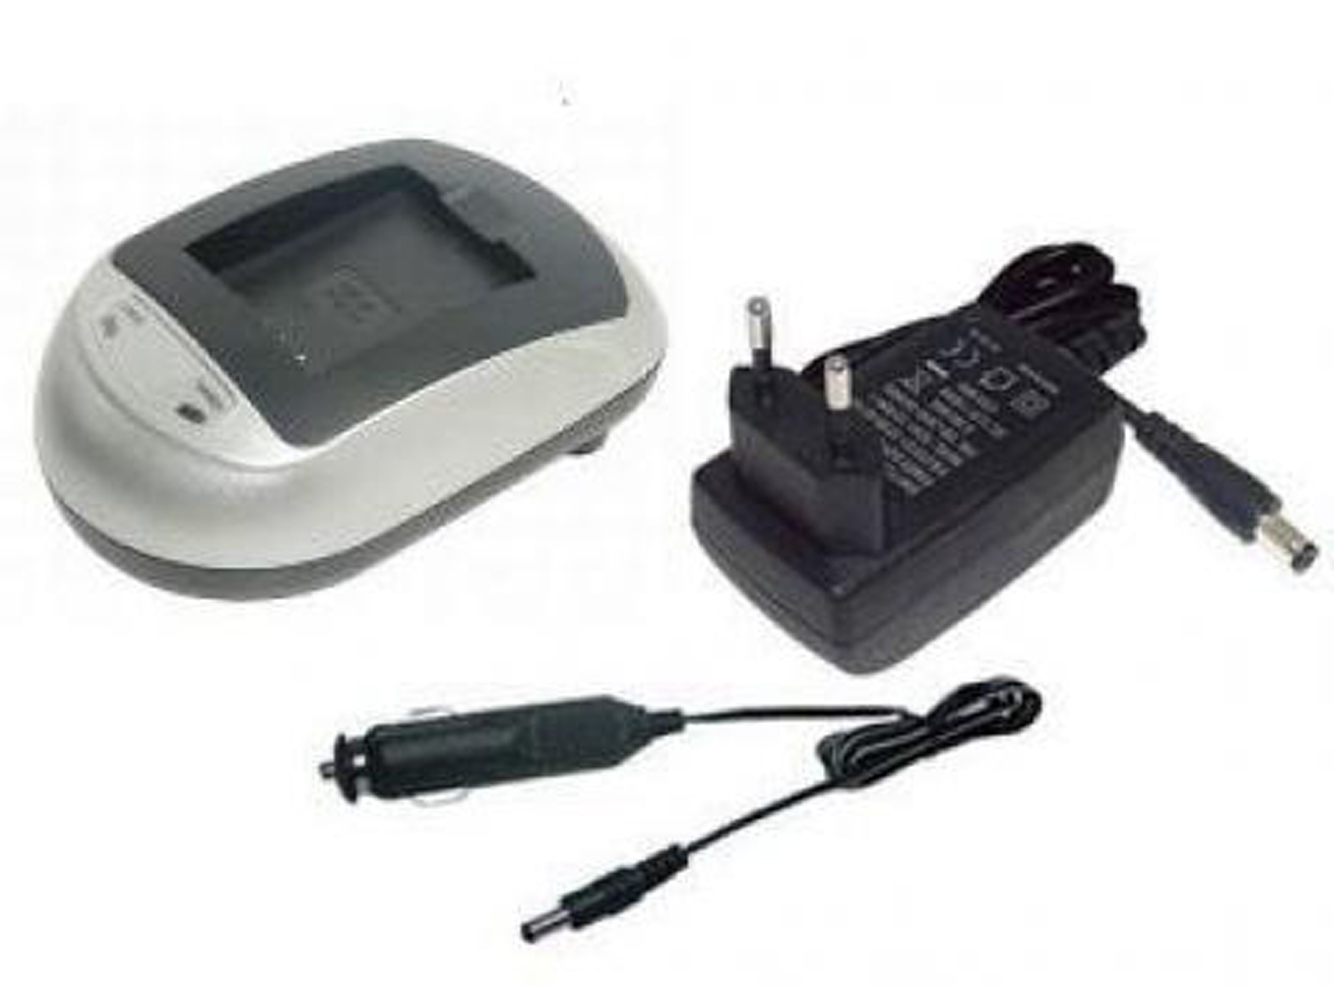 Sony Np-bg1, Np-fg1 Battery Chargers For Cyber-shot Dsc-h10, Cyber-shot Dsc-h10/b replacement